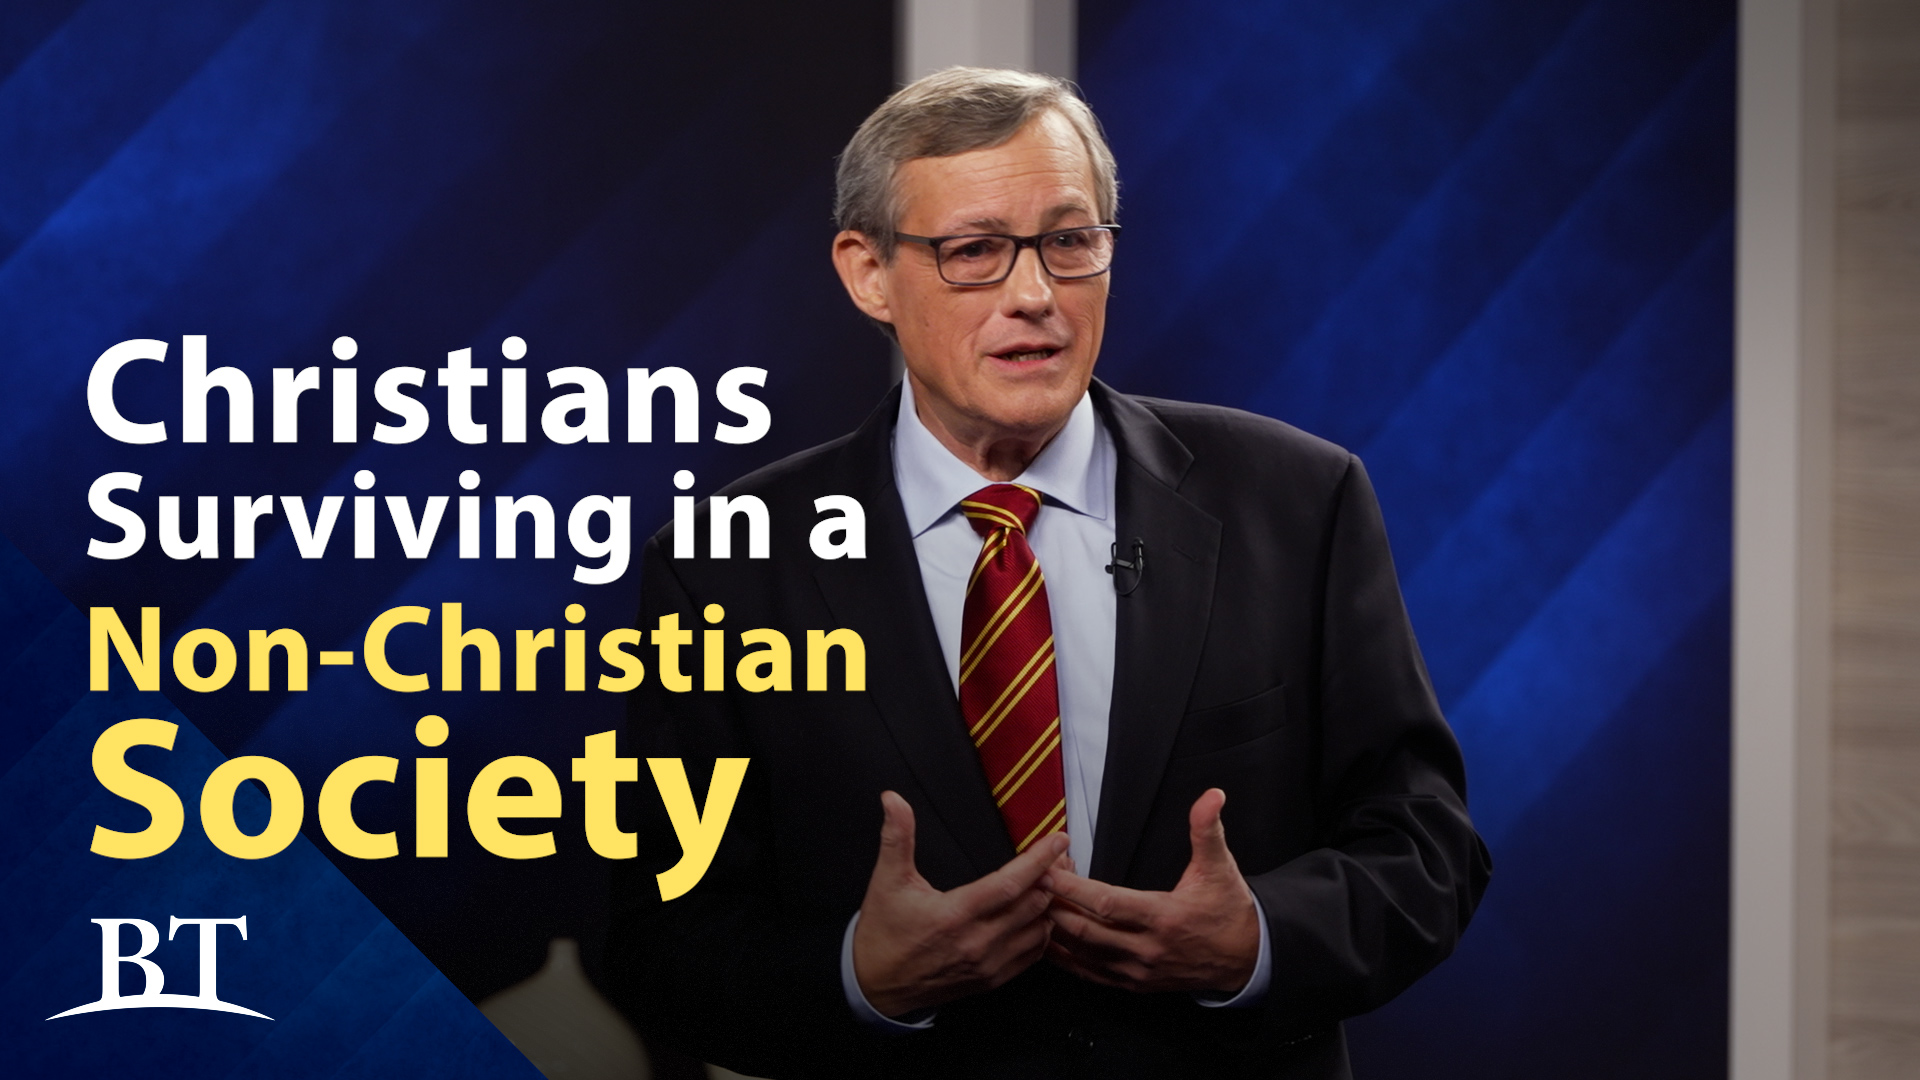 christians-surviving-in-a-non-christian-society-beyond-today-tv